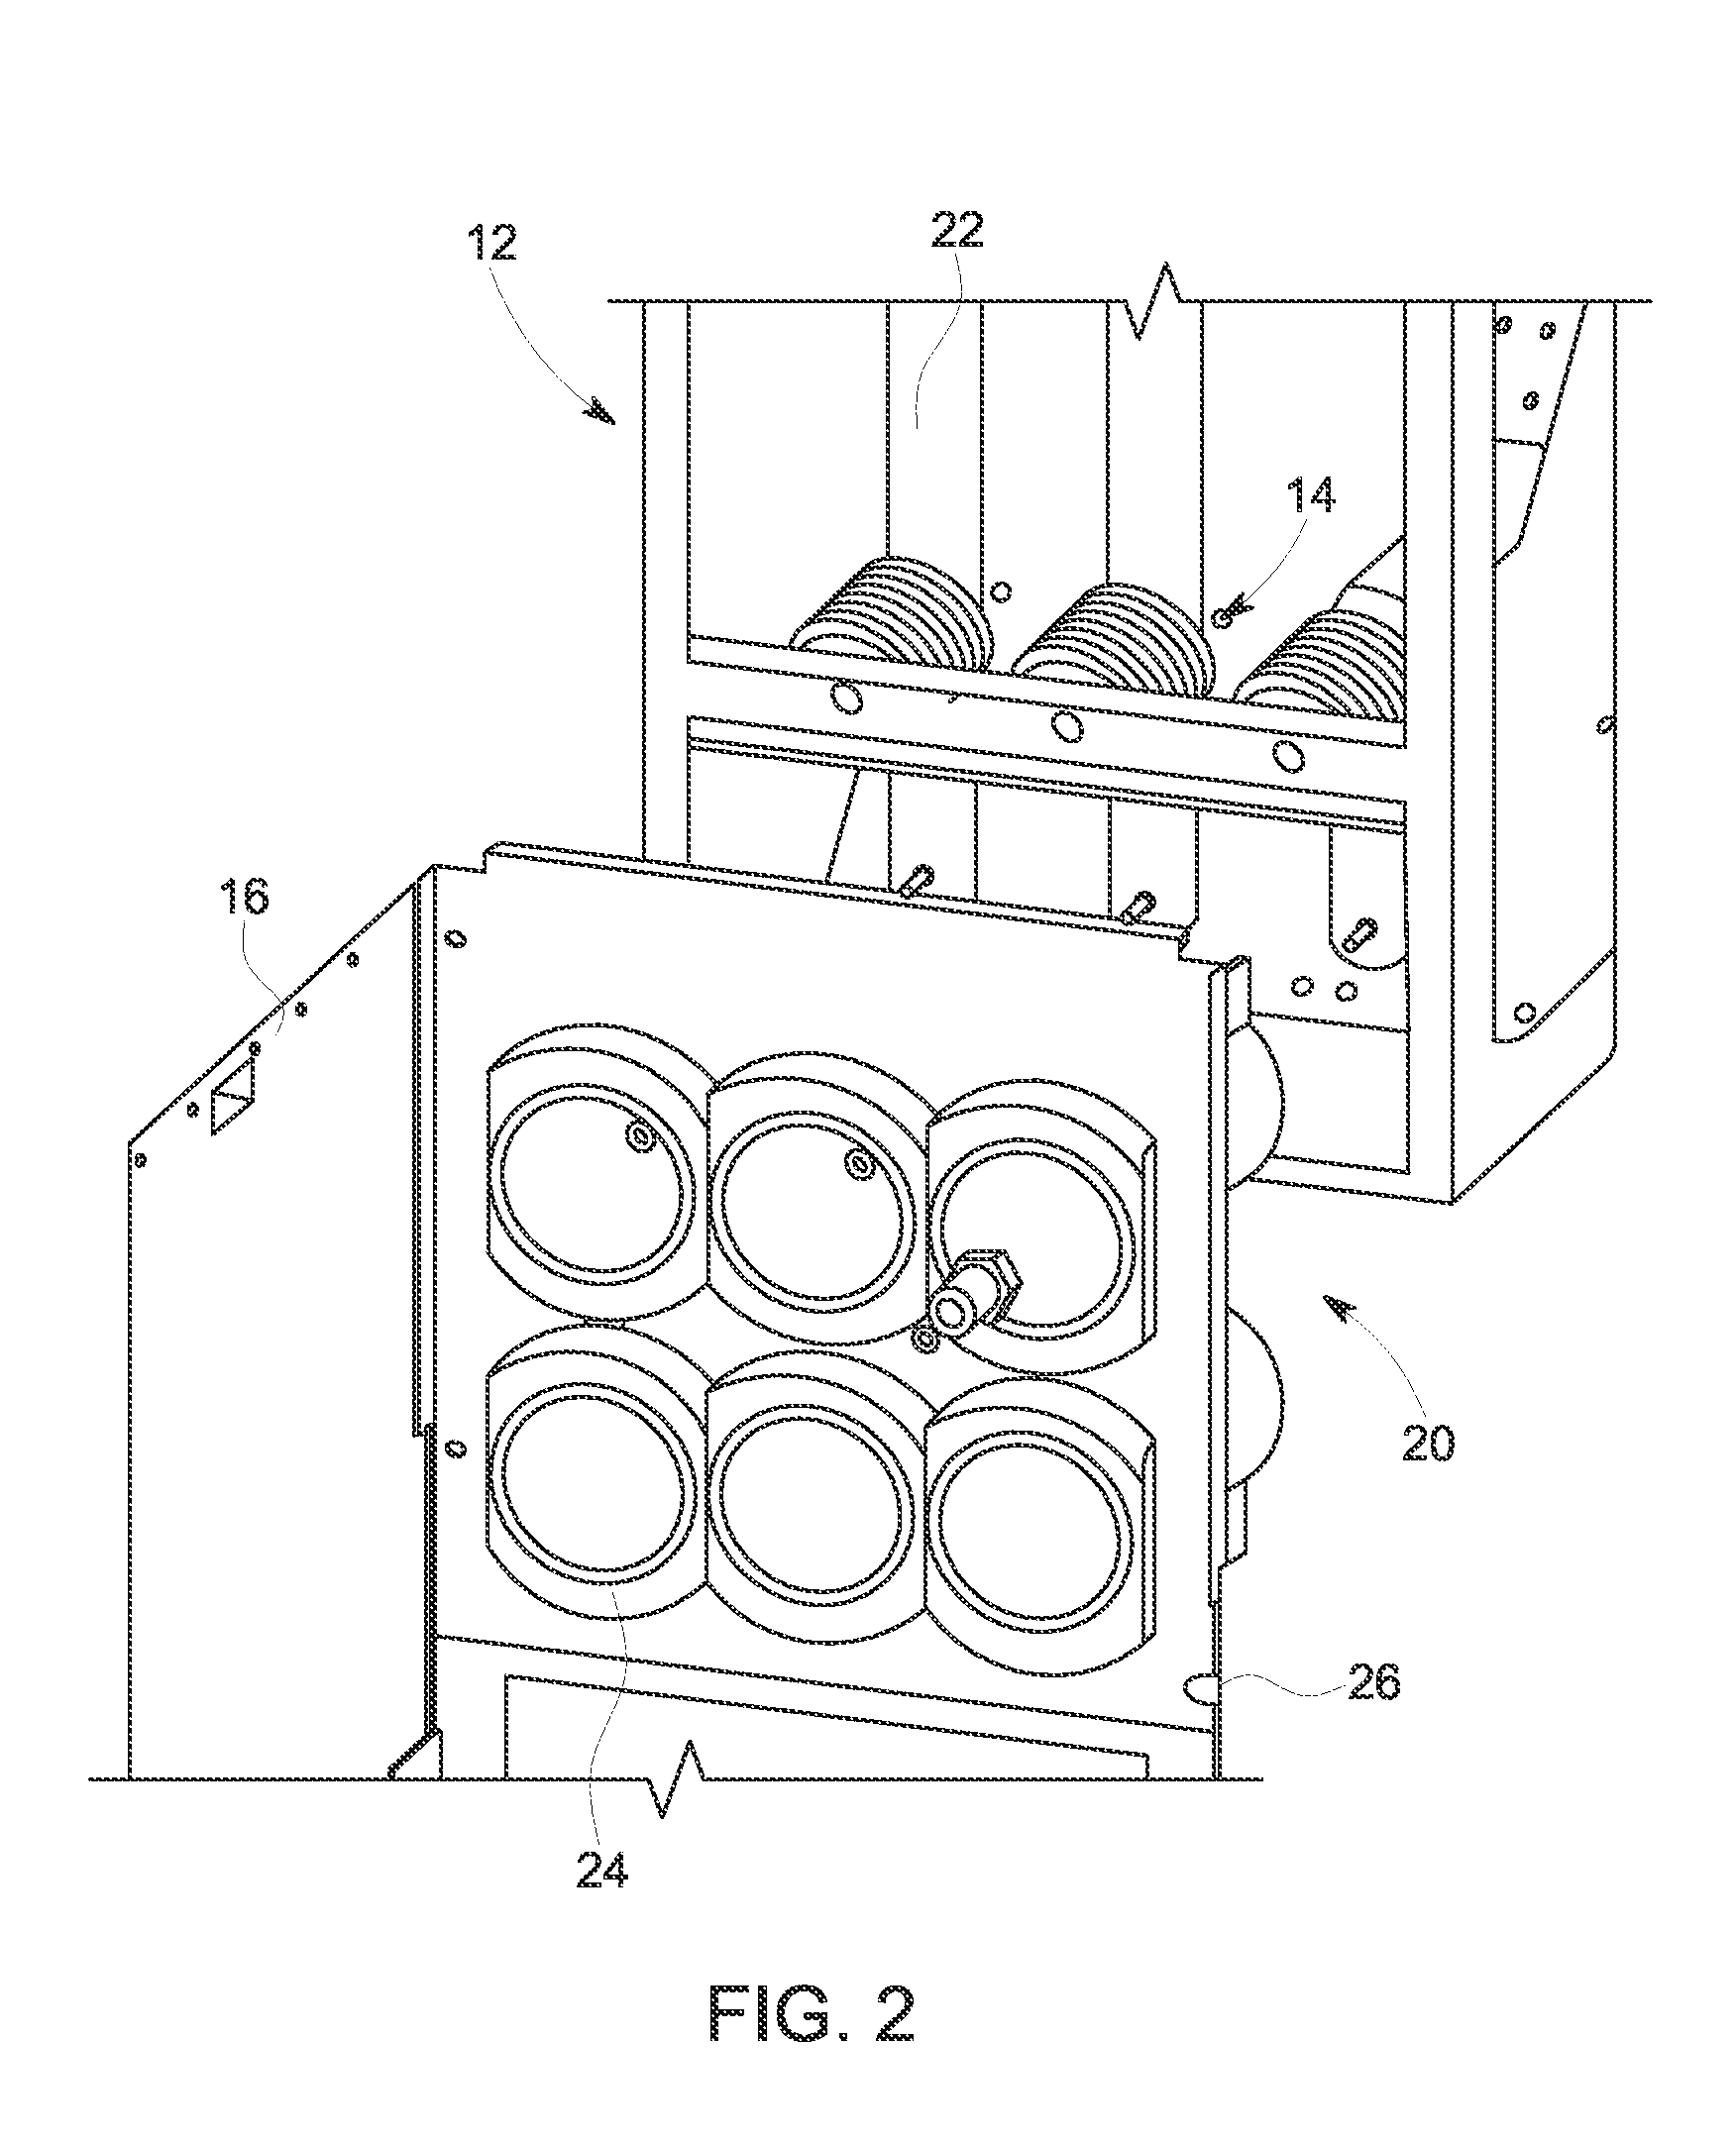 Modular switchgear connection and method of electrically connecting a modular compartment to a switchgear assembly